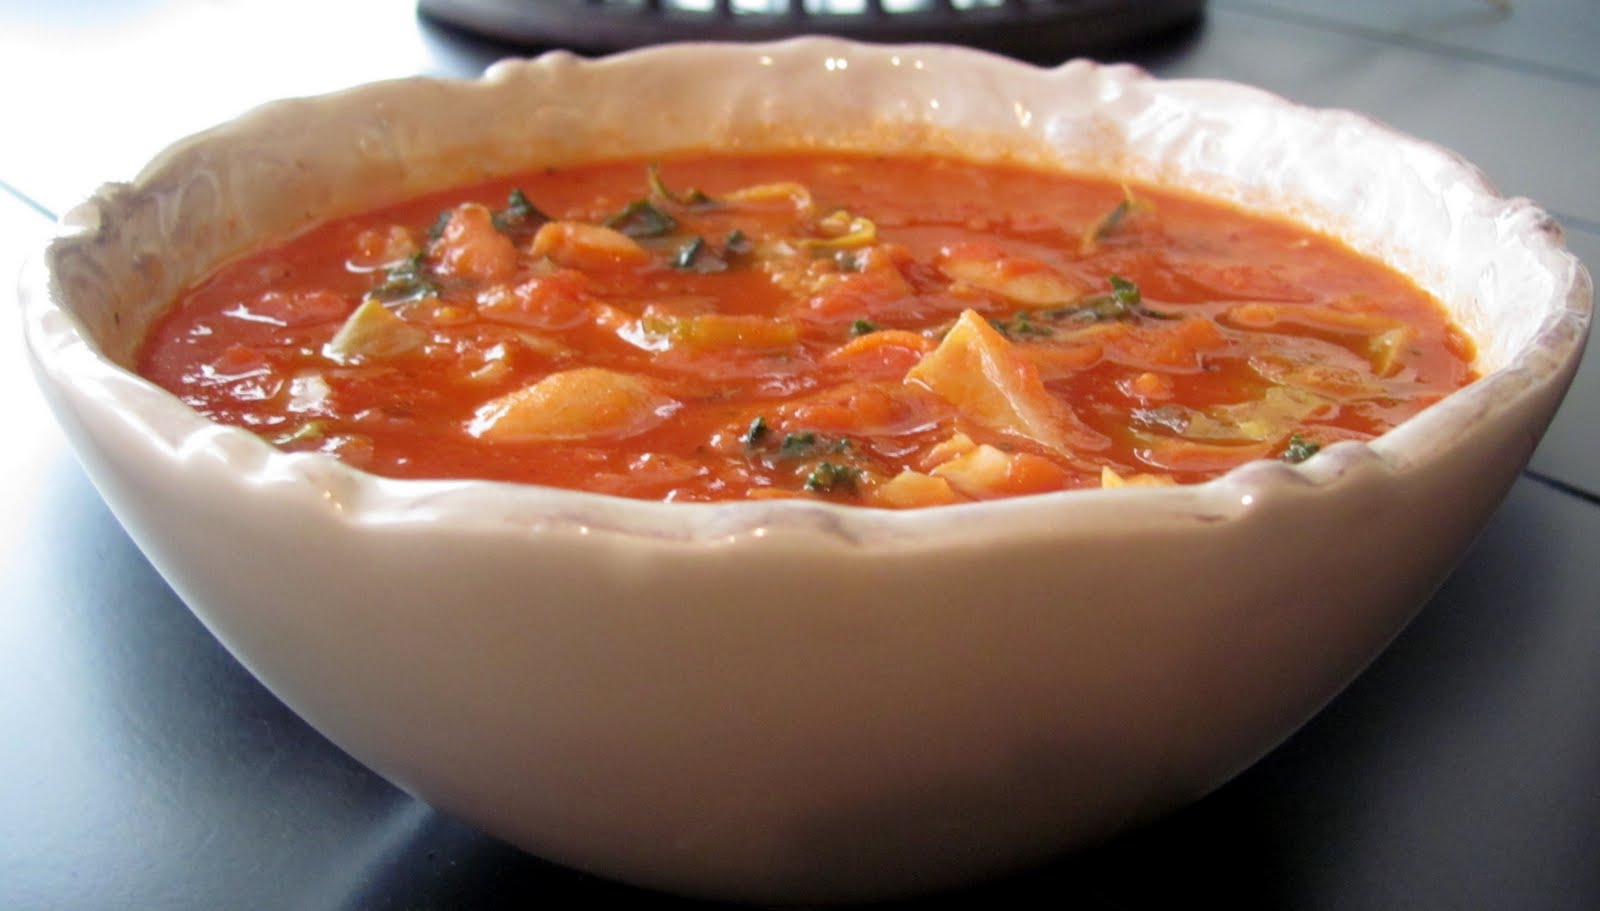 The Health Seekers Kitchen: Tuscan Soup